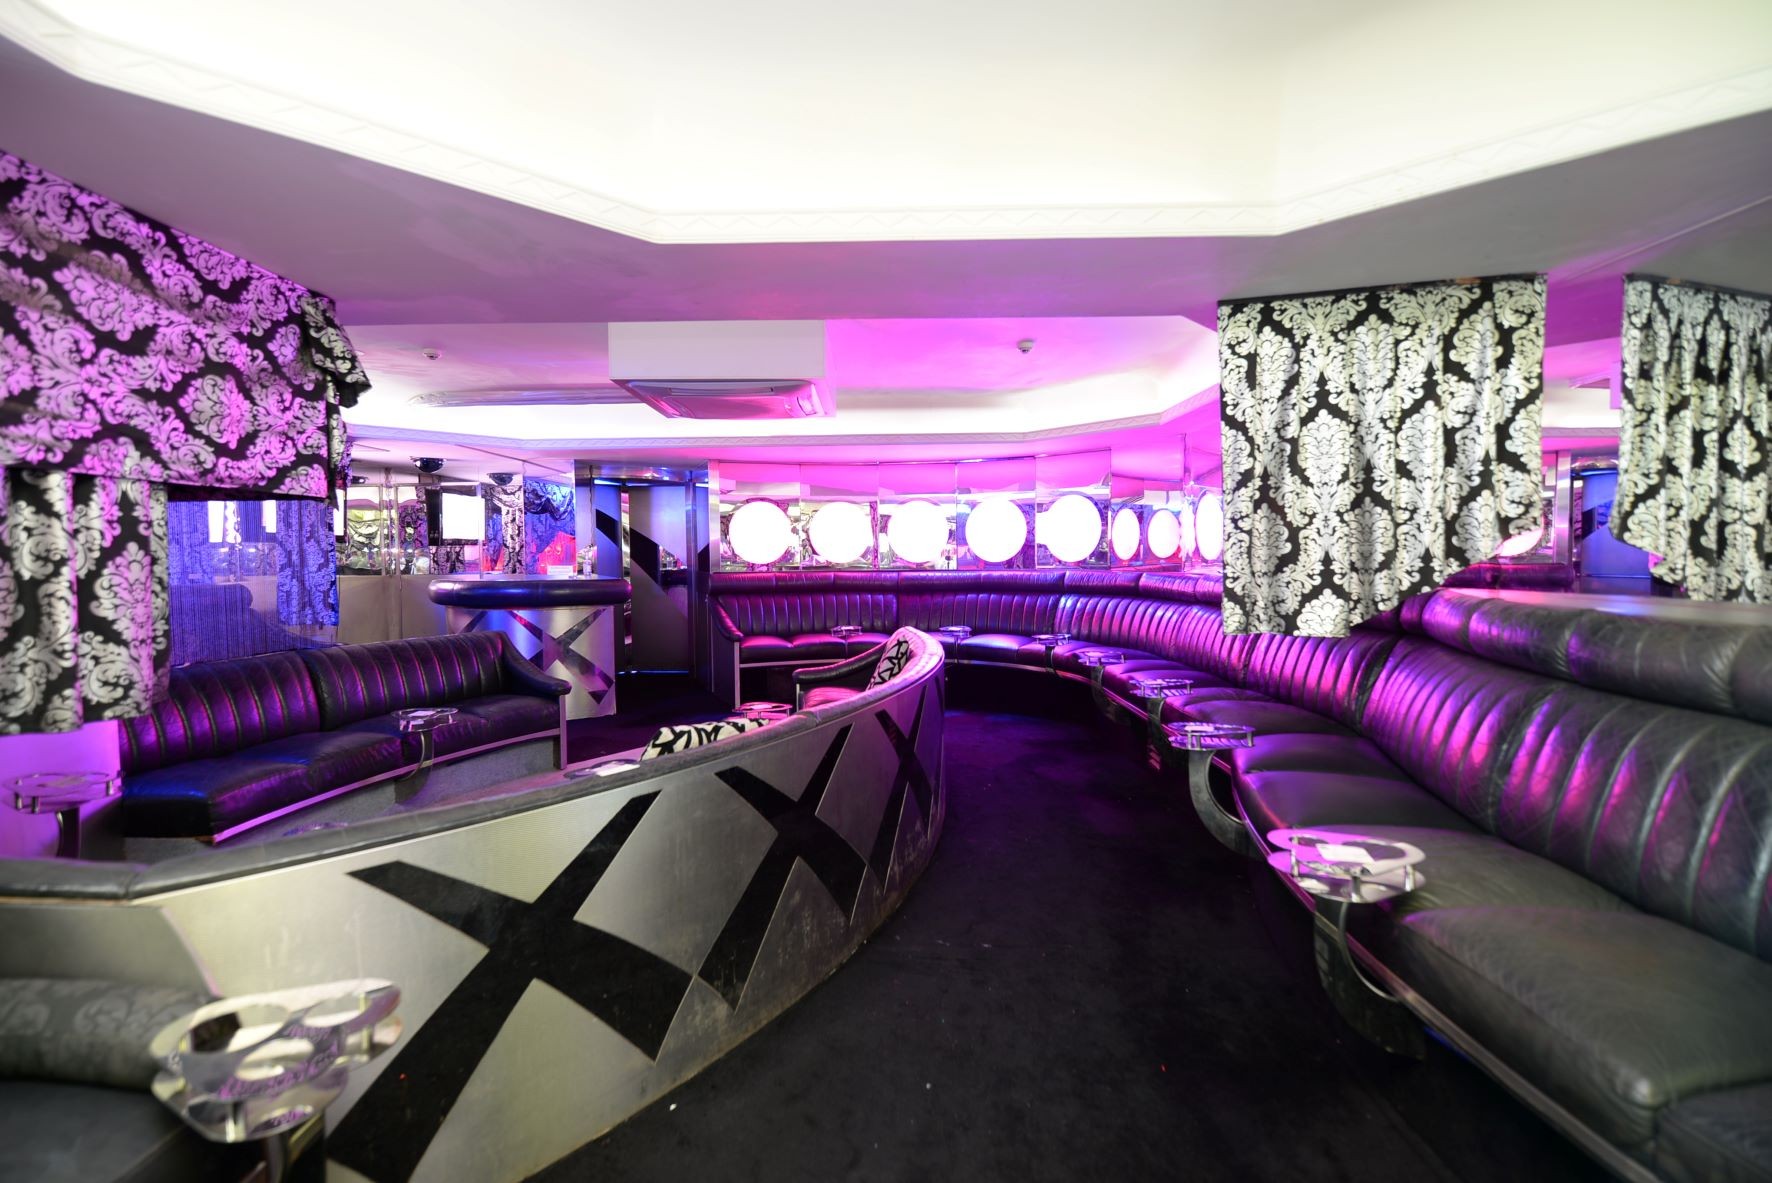 Gentlemens club located in Brisbane's night...Business For Sale